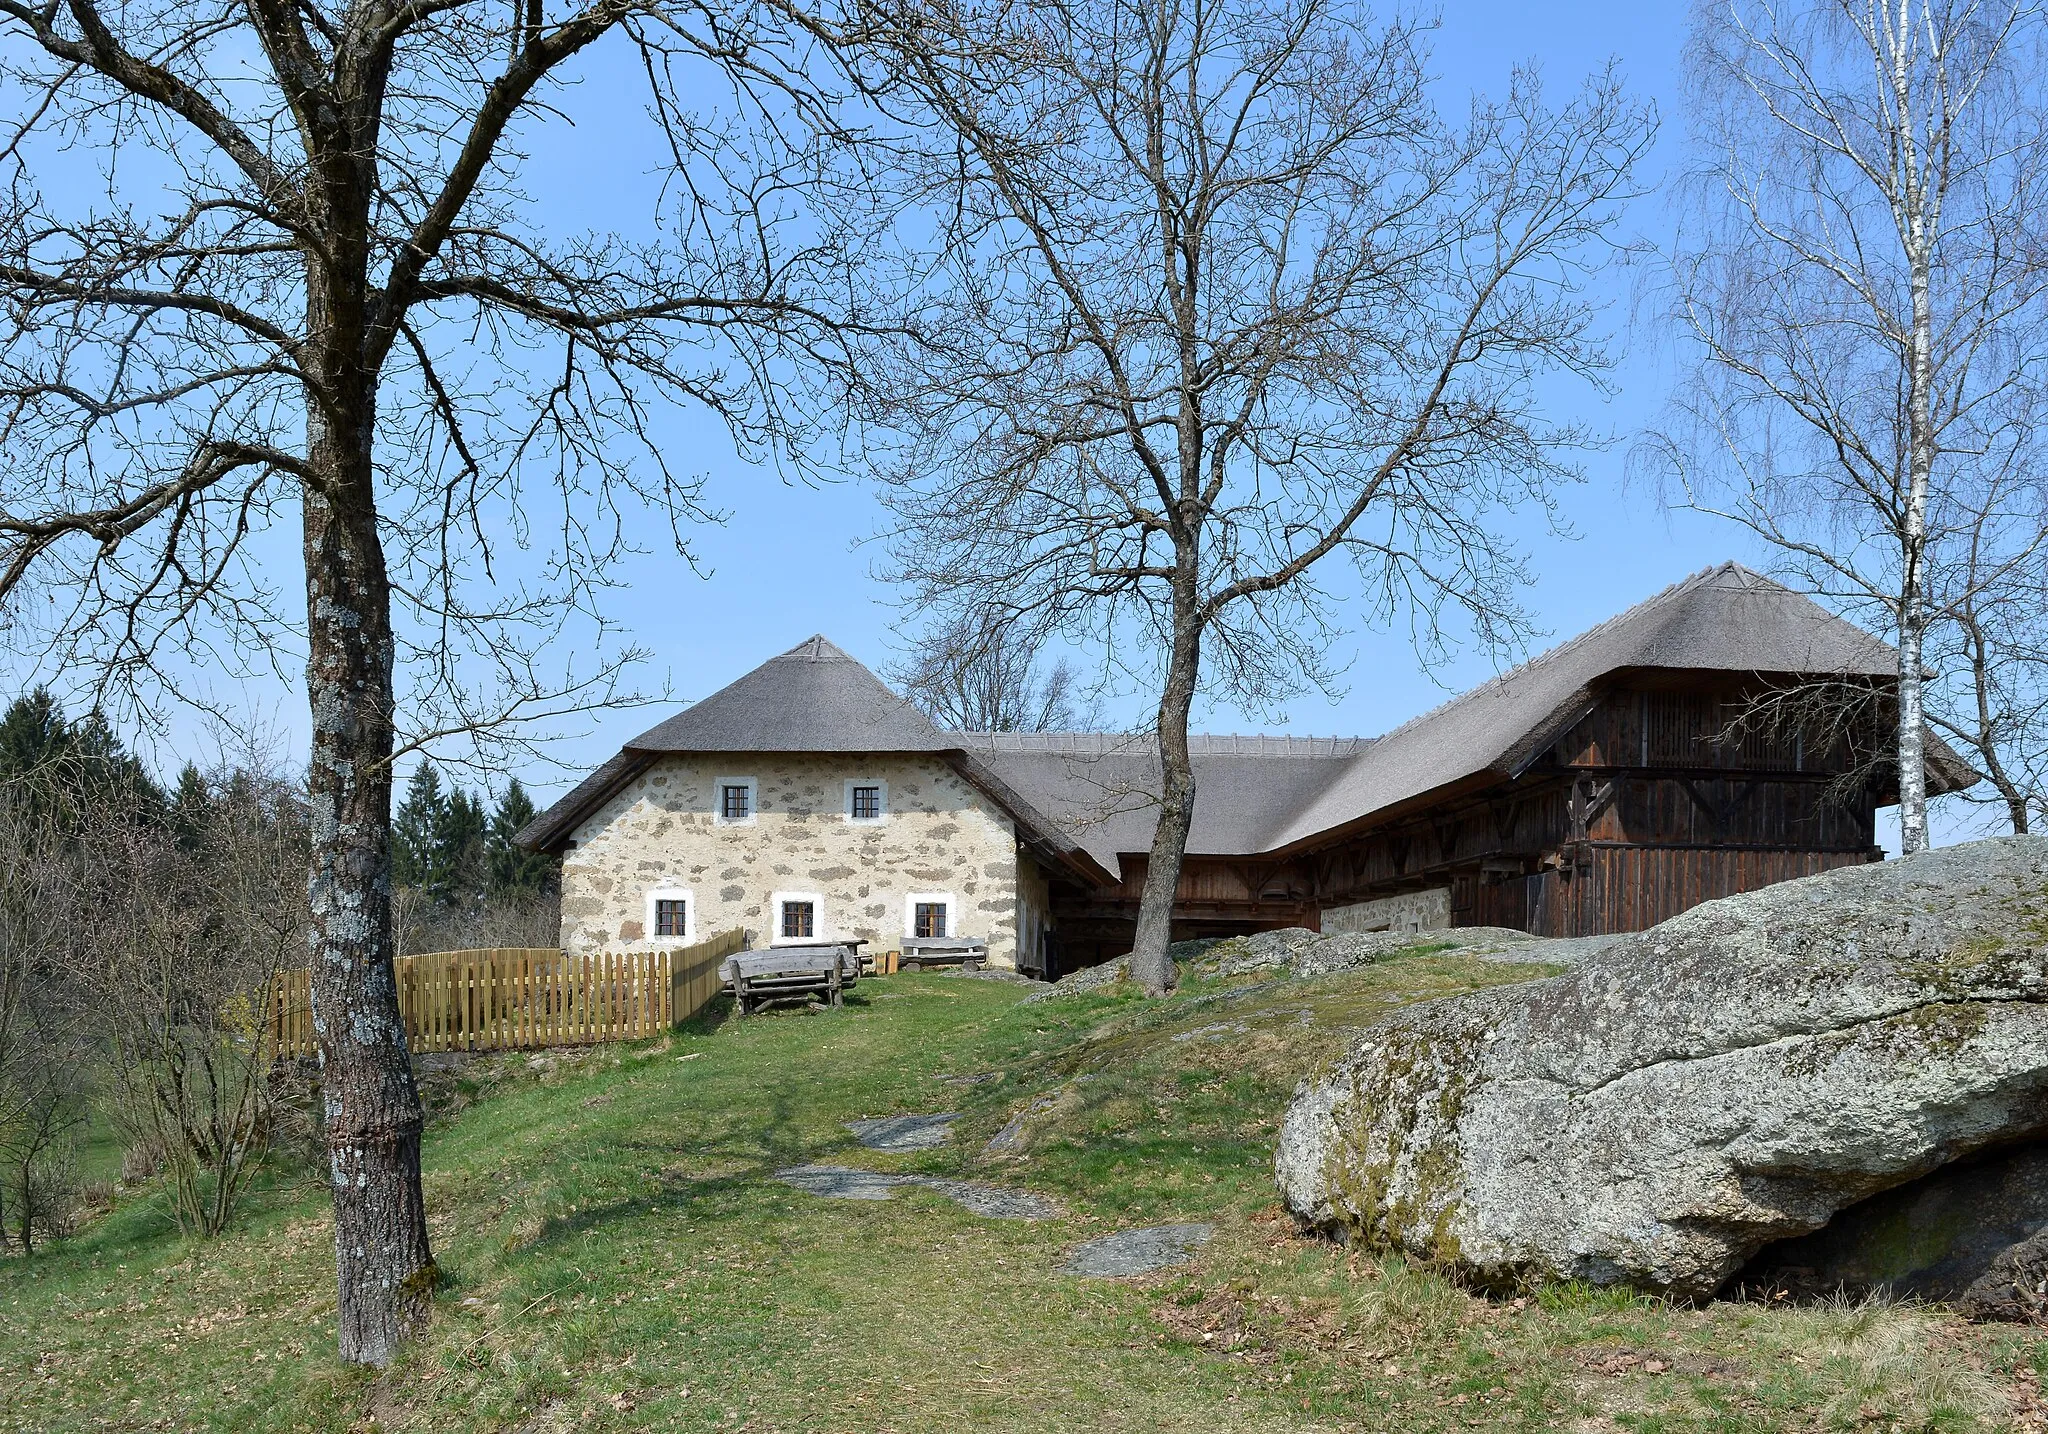 Photo showing: The farmhouse of Großdöllner is approximately 400 years old and was operated as farm until 1968. In 1994 the community of Rechberg bought and adapted the house as museum and event location.